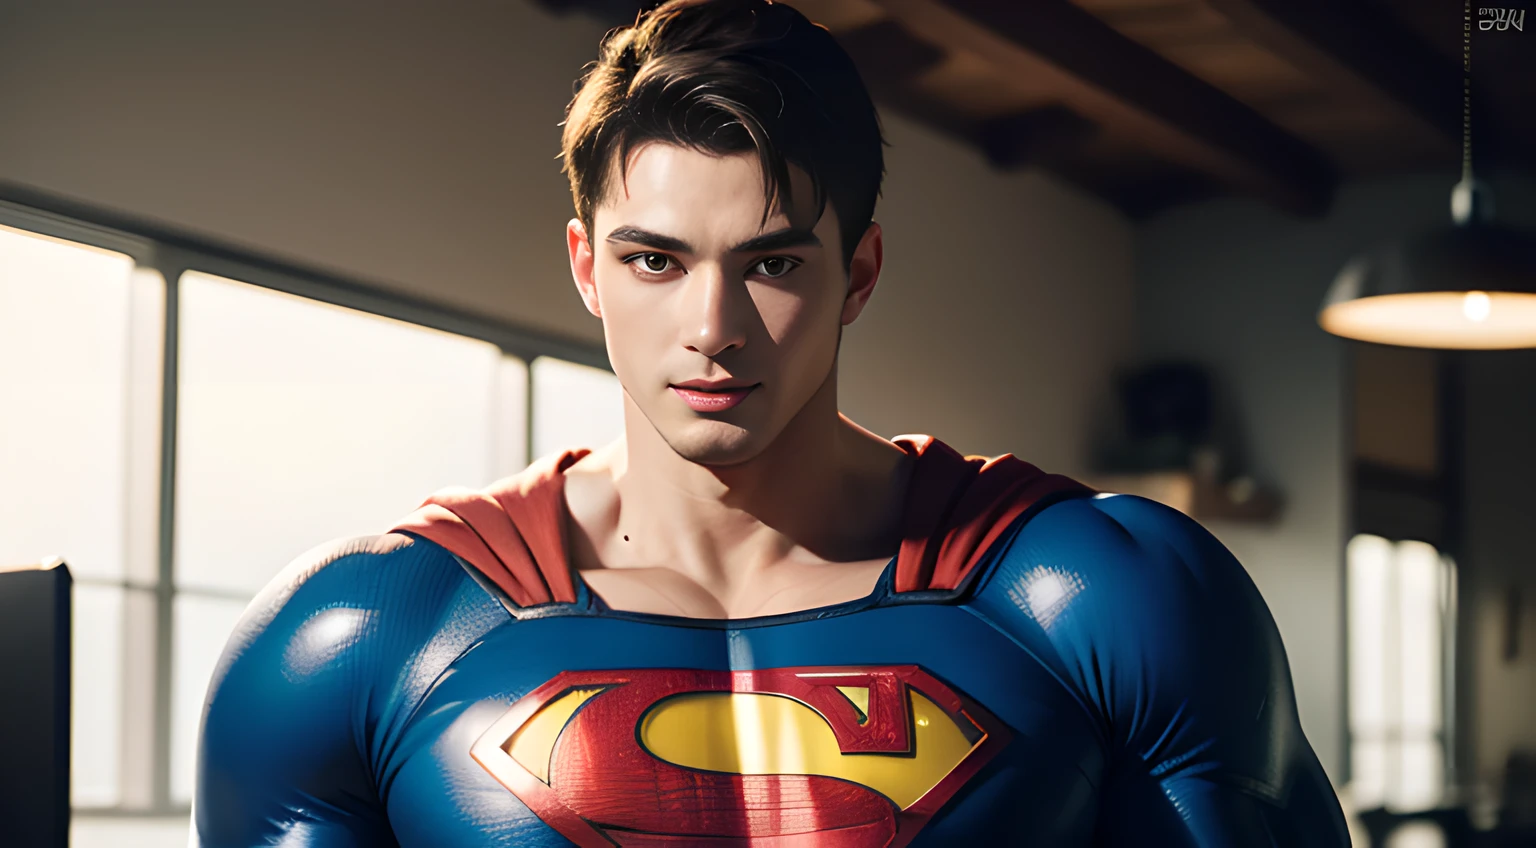 ((Men only)), (head shot), (handsome muscular man in his 20s), (superman), (Superman, a fictional superhero, is characterized by his chiseled physique, blue eyes, dark hair, and iconic red and blue costume with a bold "S" emblem on his chest), (Chris Redfield), (Mischievous smile), (detaile: 1 in 1), Natural muscles, HIG quality, beautidful eyes, (Detailed face and eyes), (Face、: 1 / 2), Noise, Real Photographics、... .................................................................................................................PSD, Sharp Focus, High resolution 8K, realisitic & Professional Photography, 8K UHD, Soft lighting, High quality, Film grain, FujifilmXT3